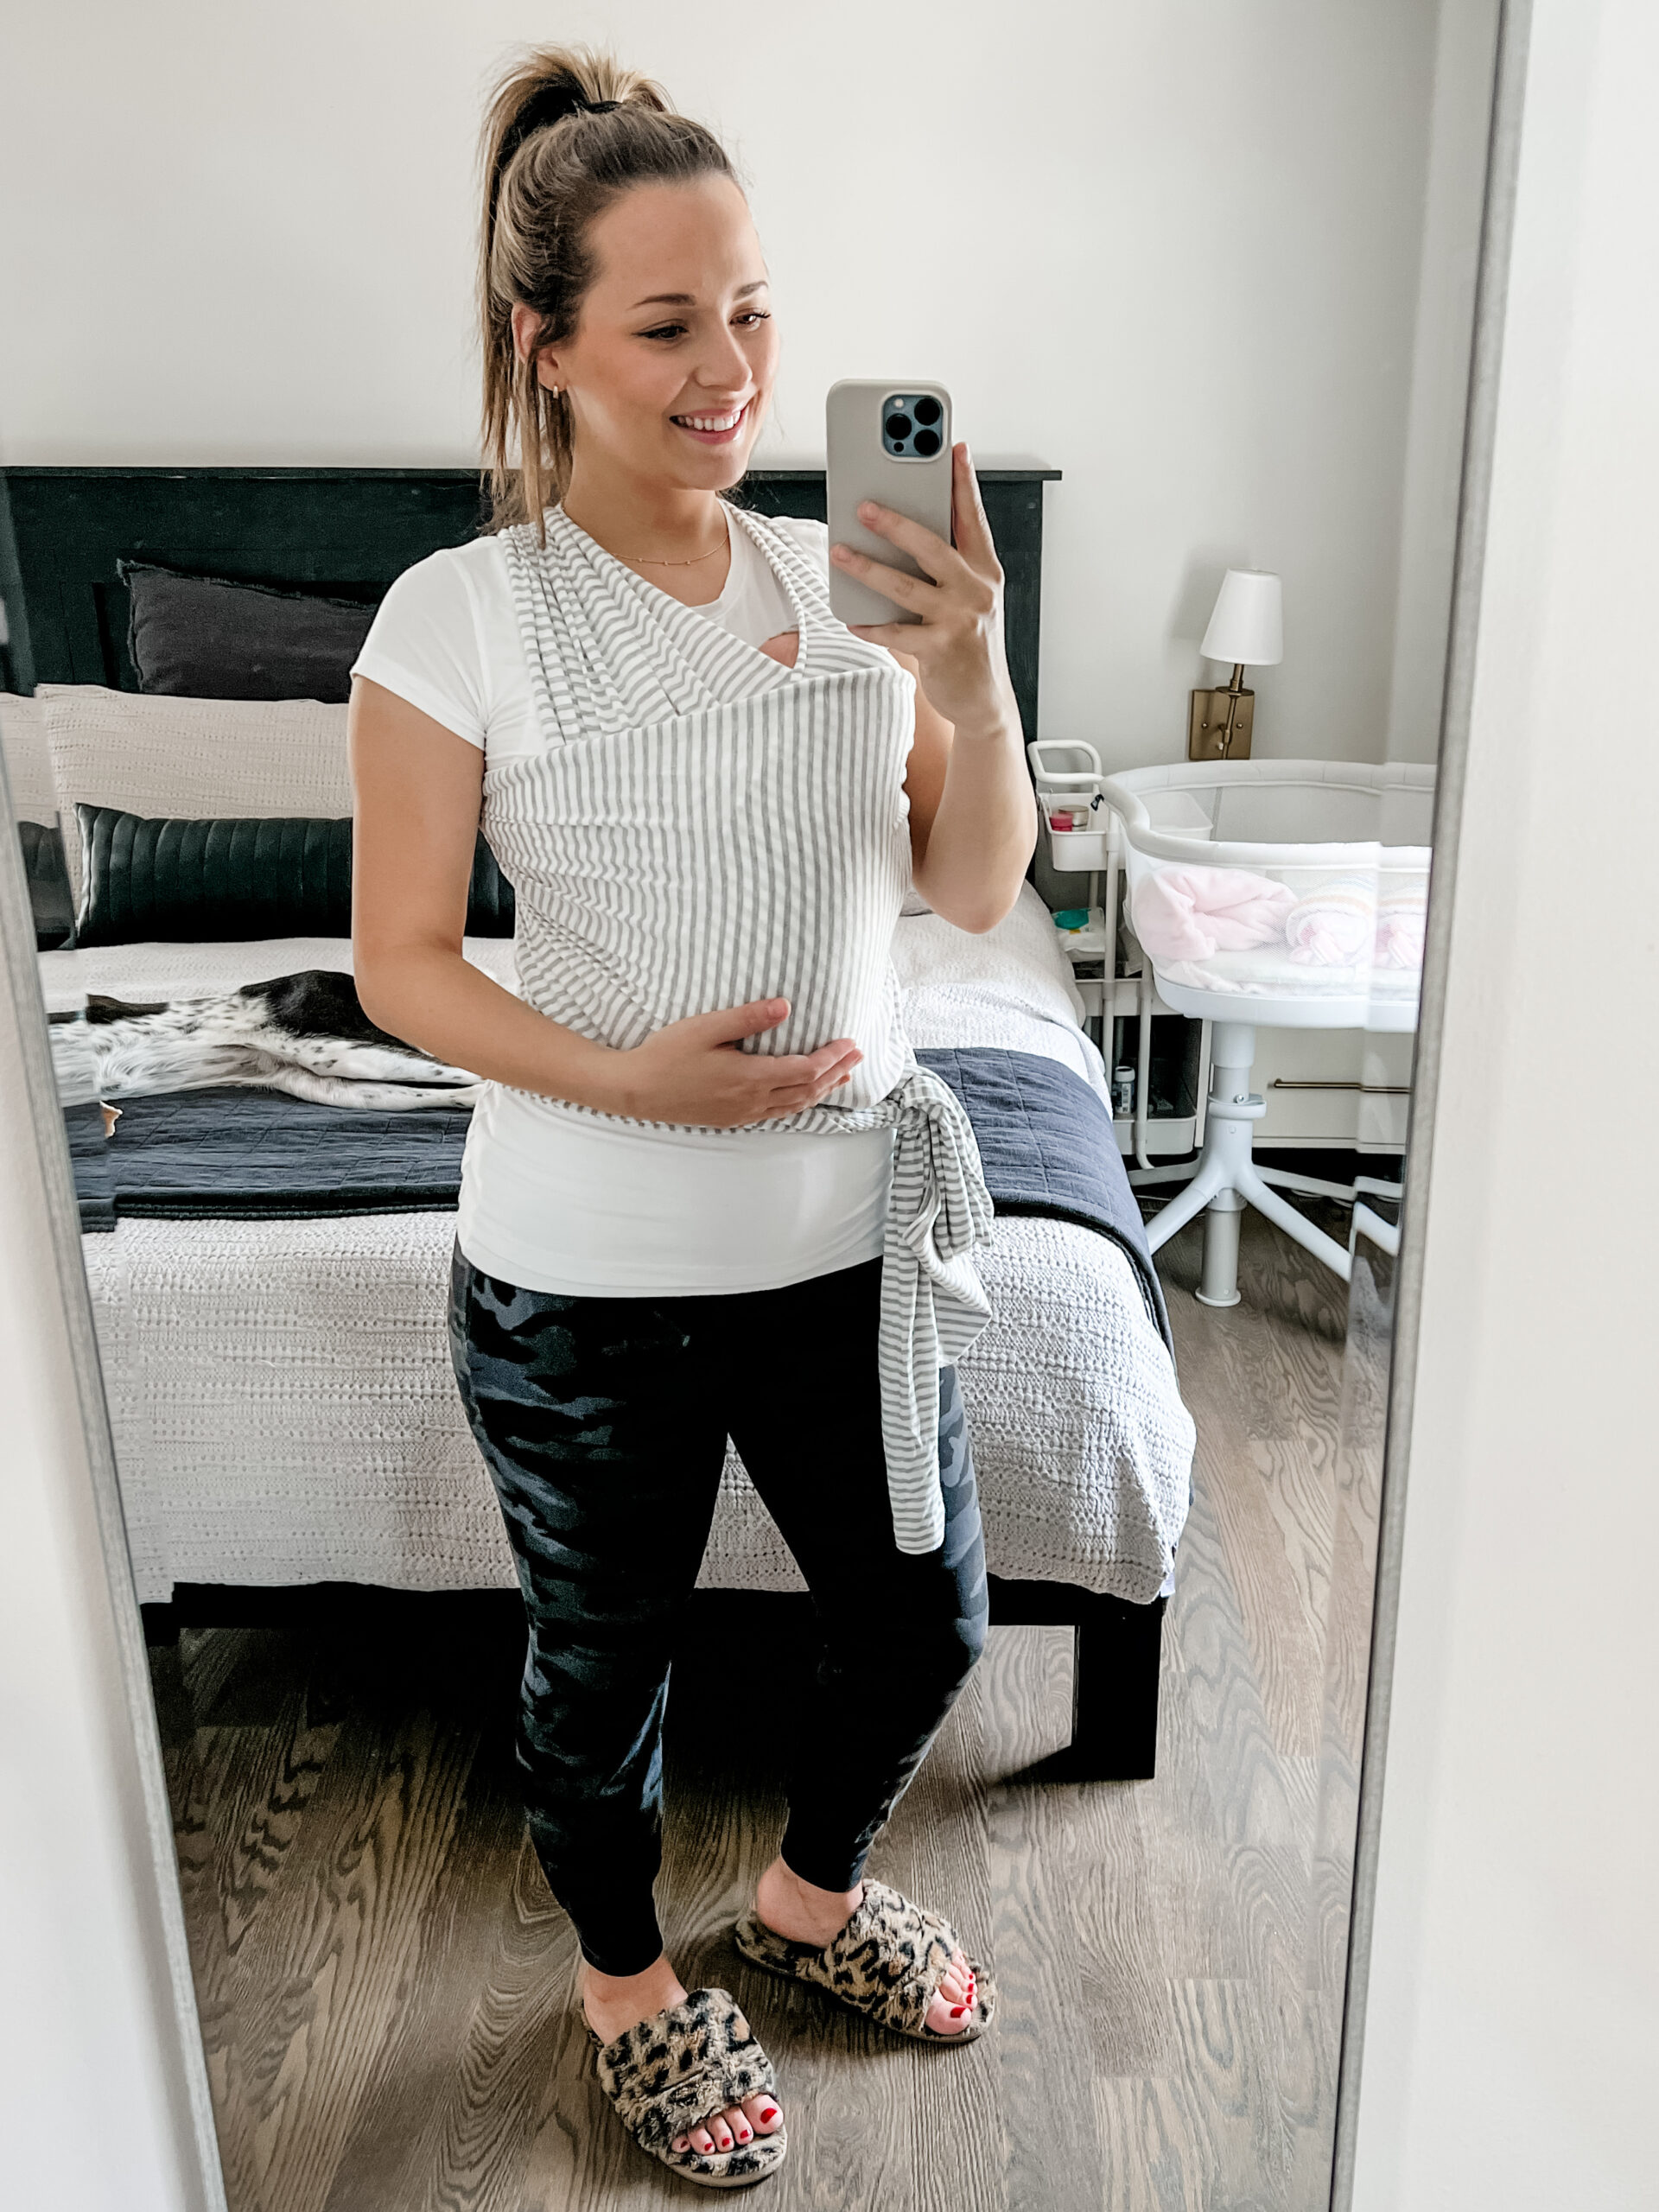 0-3 Months Newborn Baby Essentials (You Actually Need)